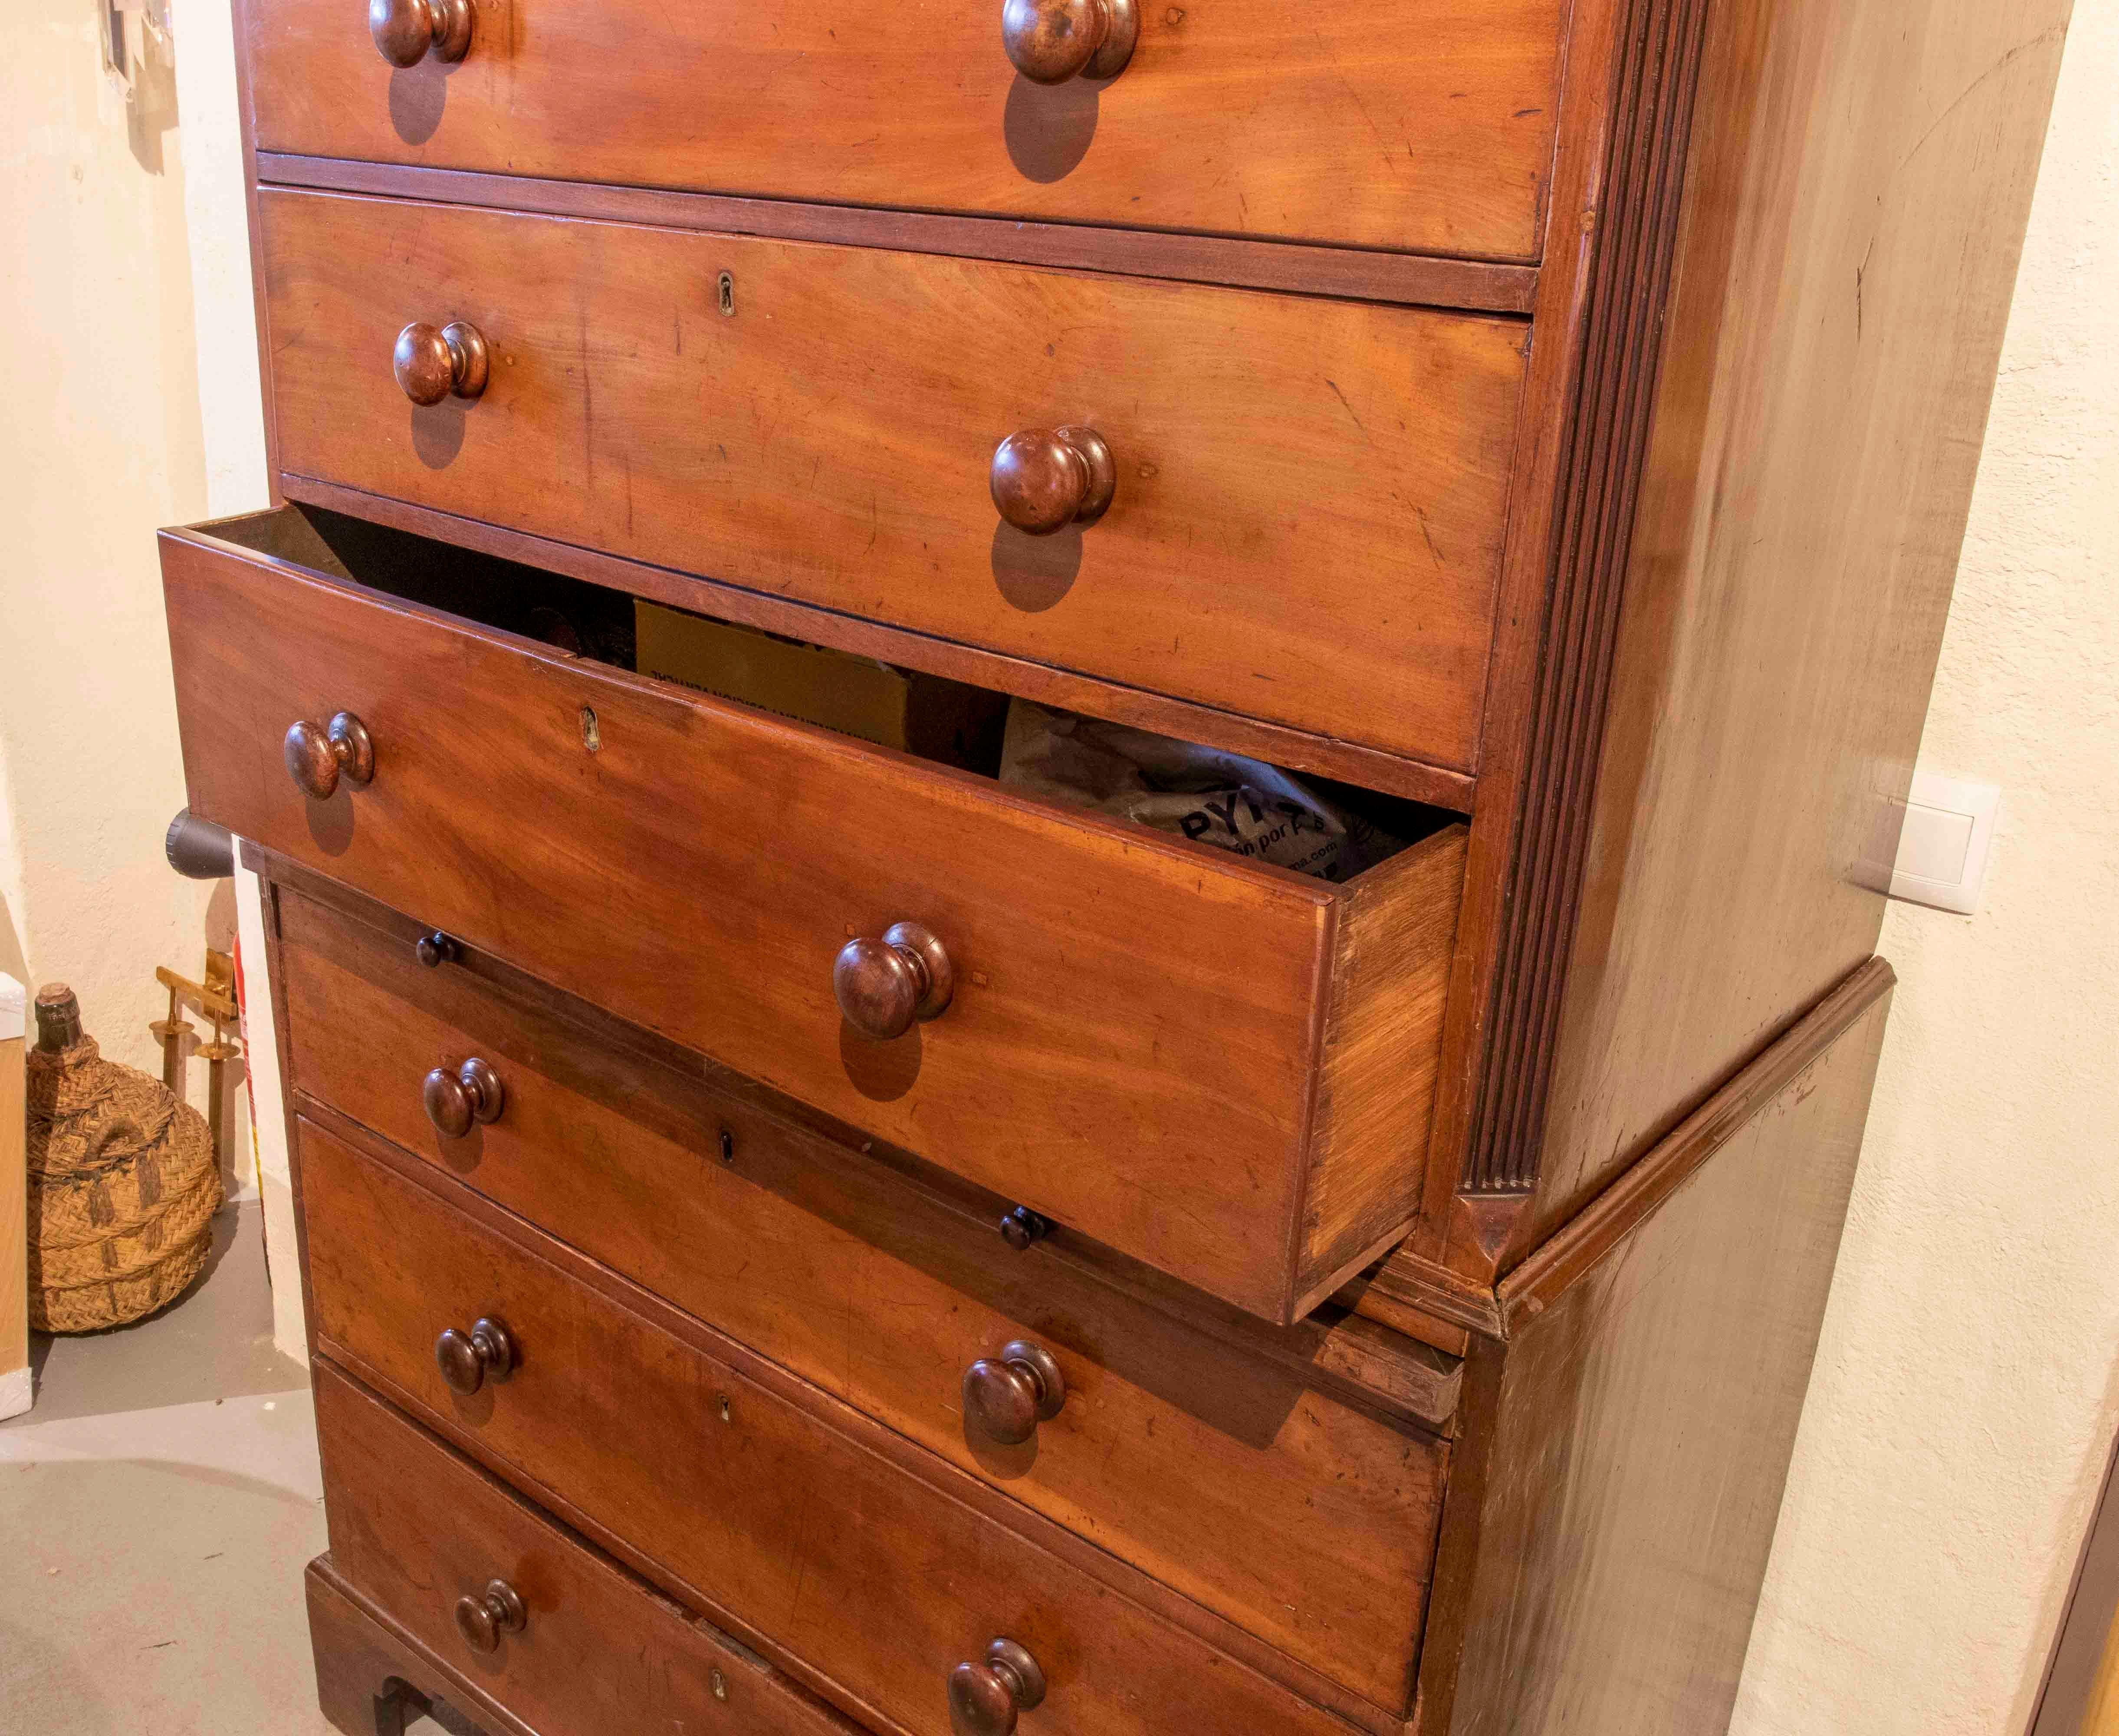 19th Century Chest of Drawers - English Mahogany Two-body Desk For Sale 5